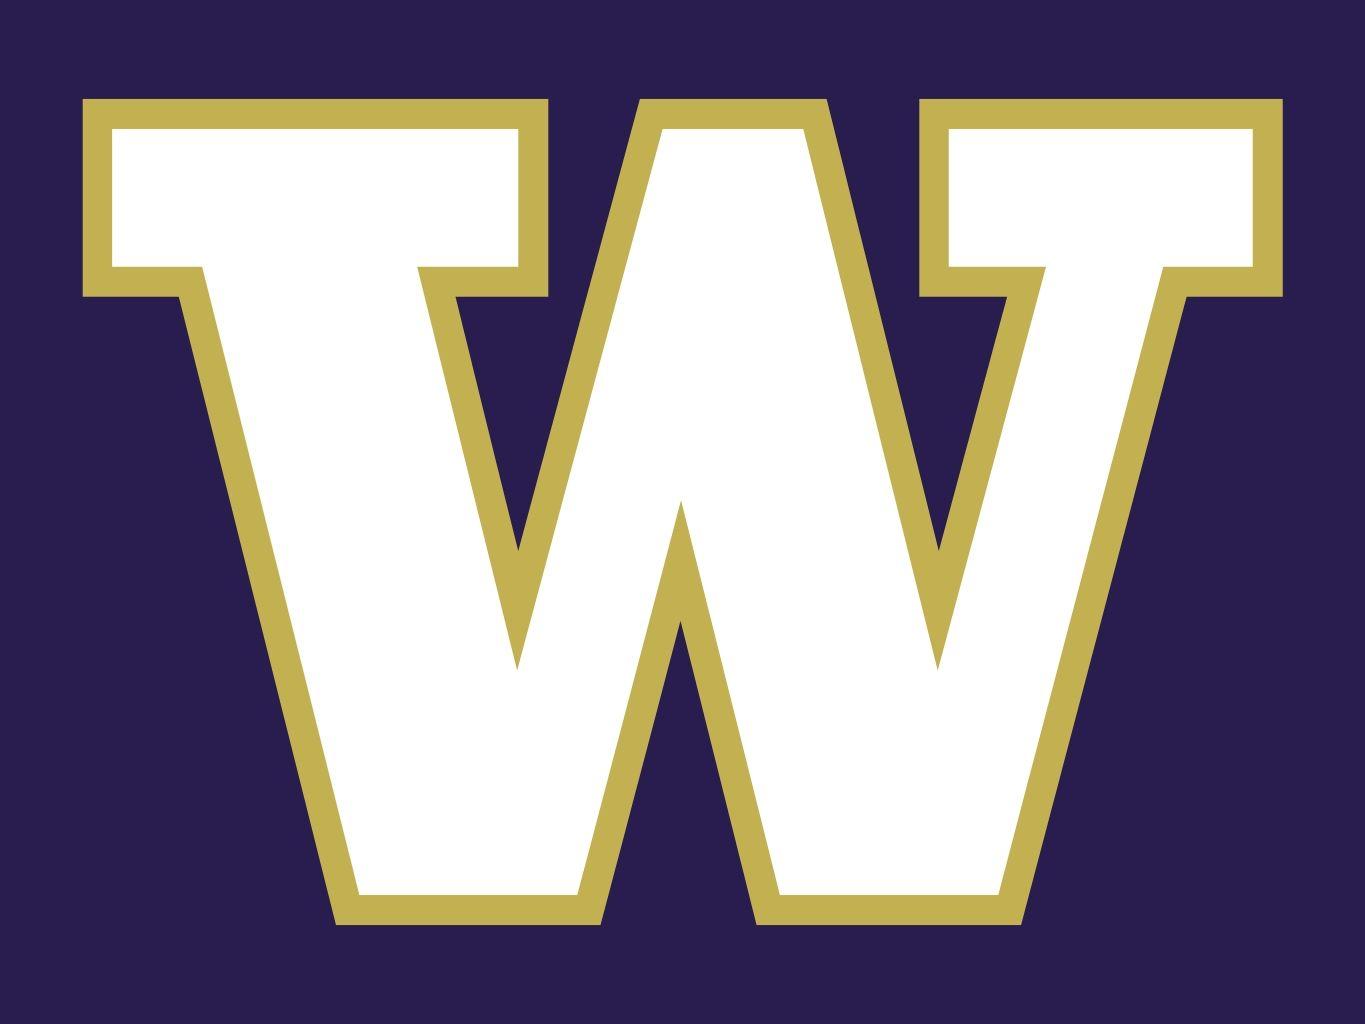 UW Huskies Wallpaper, UW Huskies Wallpaper. UW Huskies Awesome